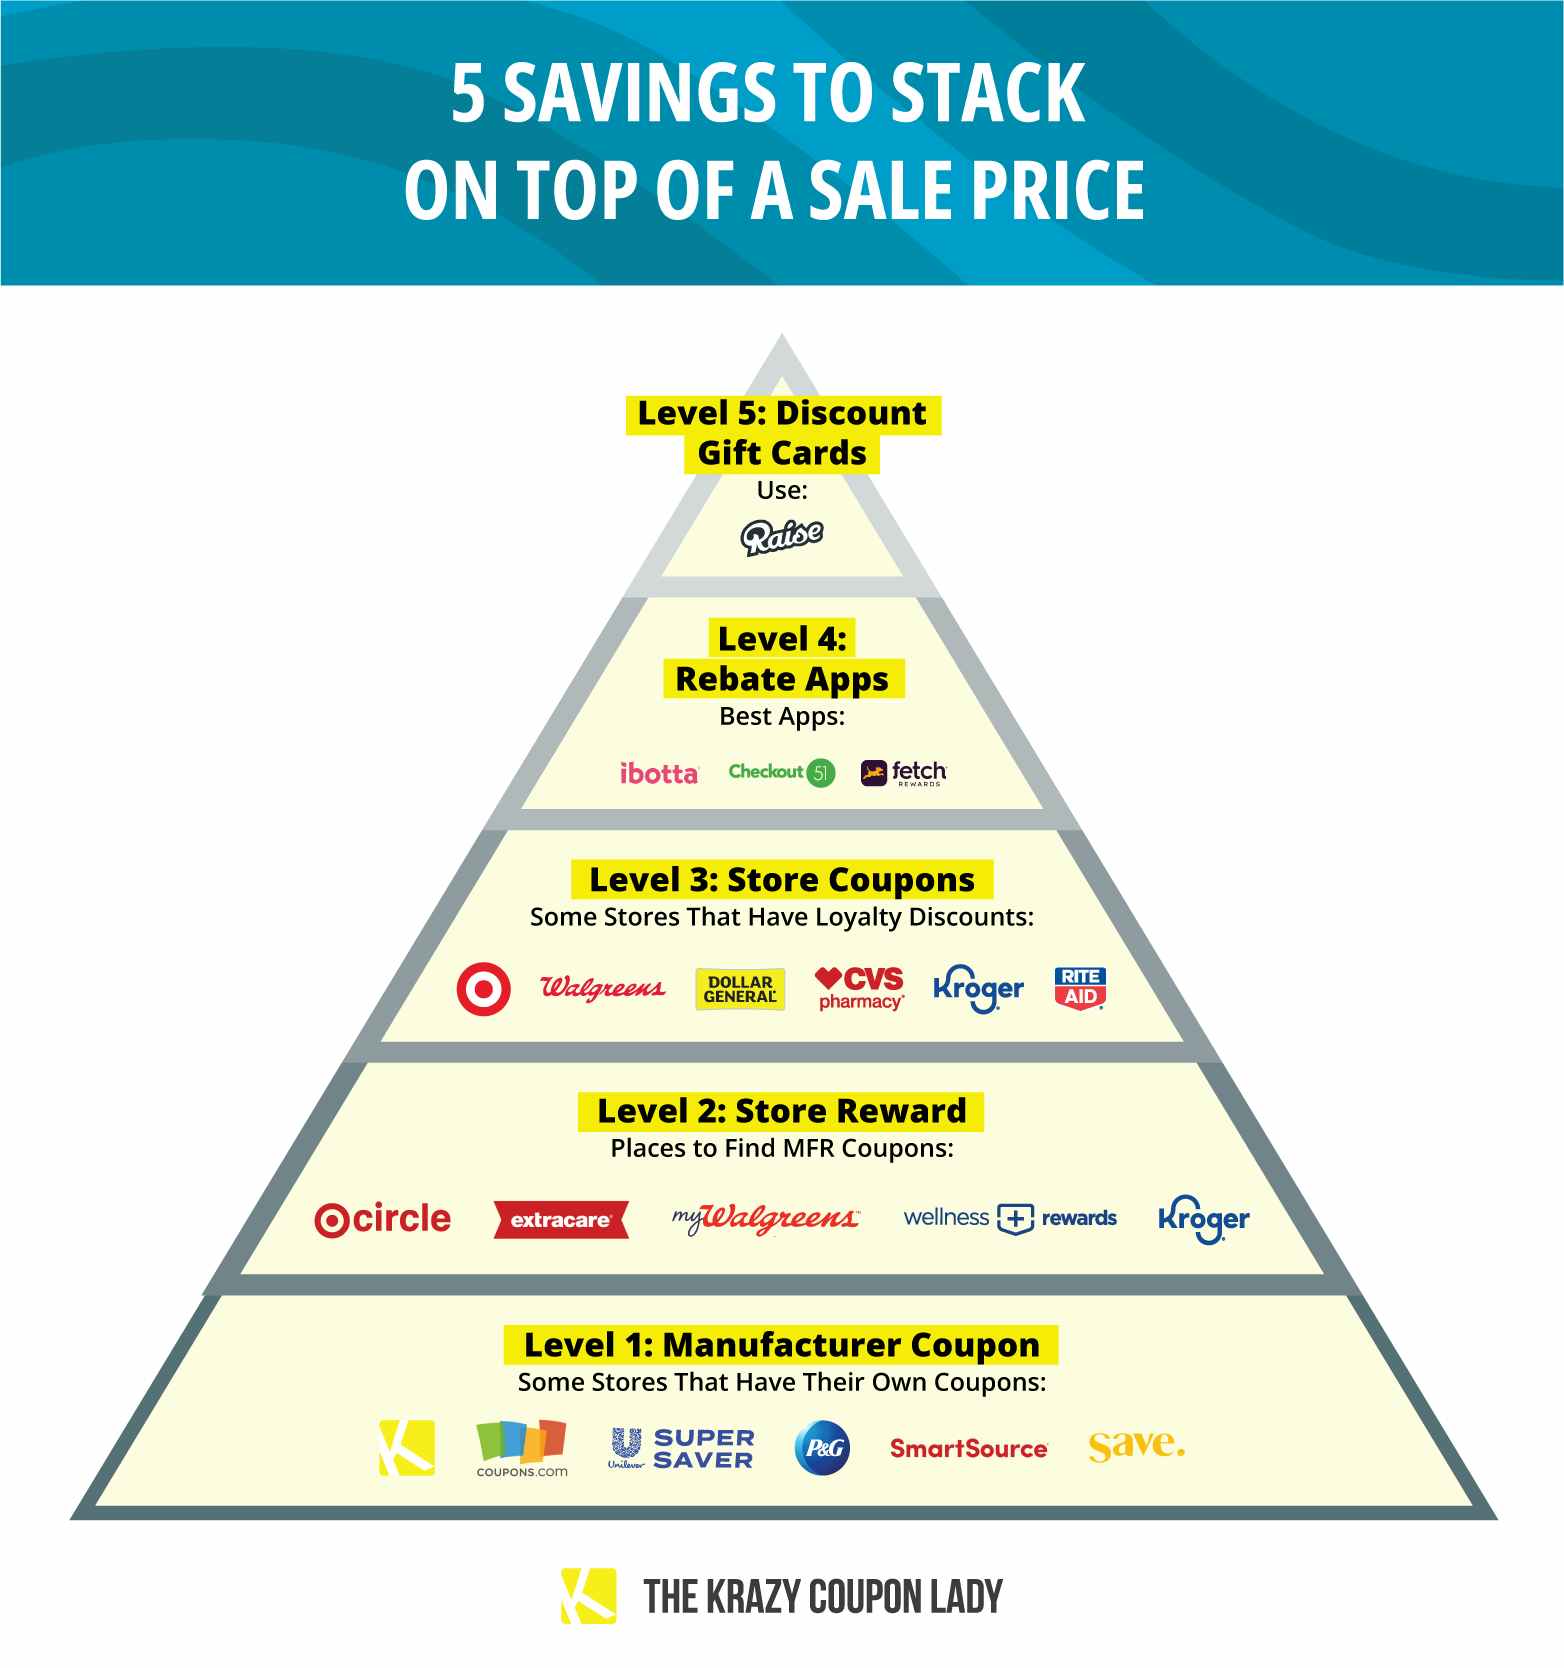 https://prod-cdn-thekrazycouponlady.imgix.net/wp-content/uploads/2016/10/coupon-stacking-pyramid-1641848356-1641848356.png?auto=format&fit=fill&q=25